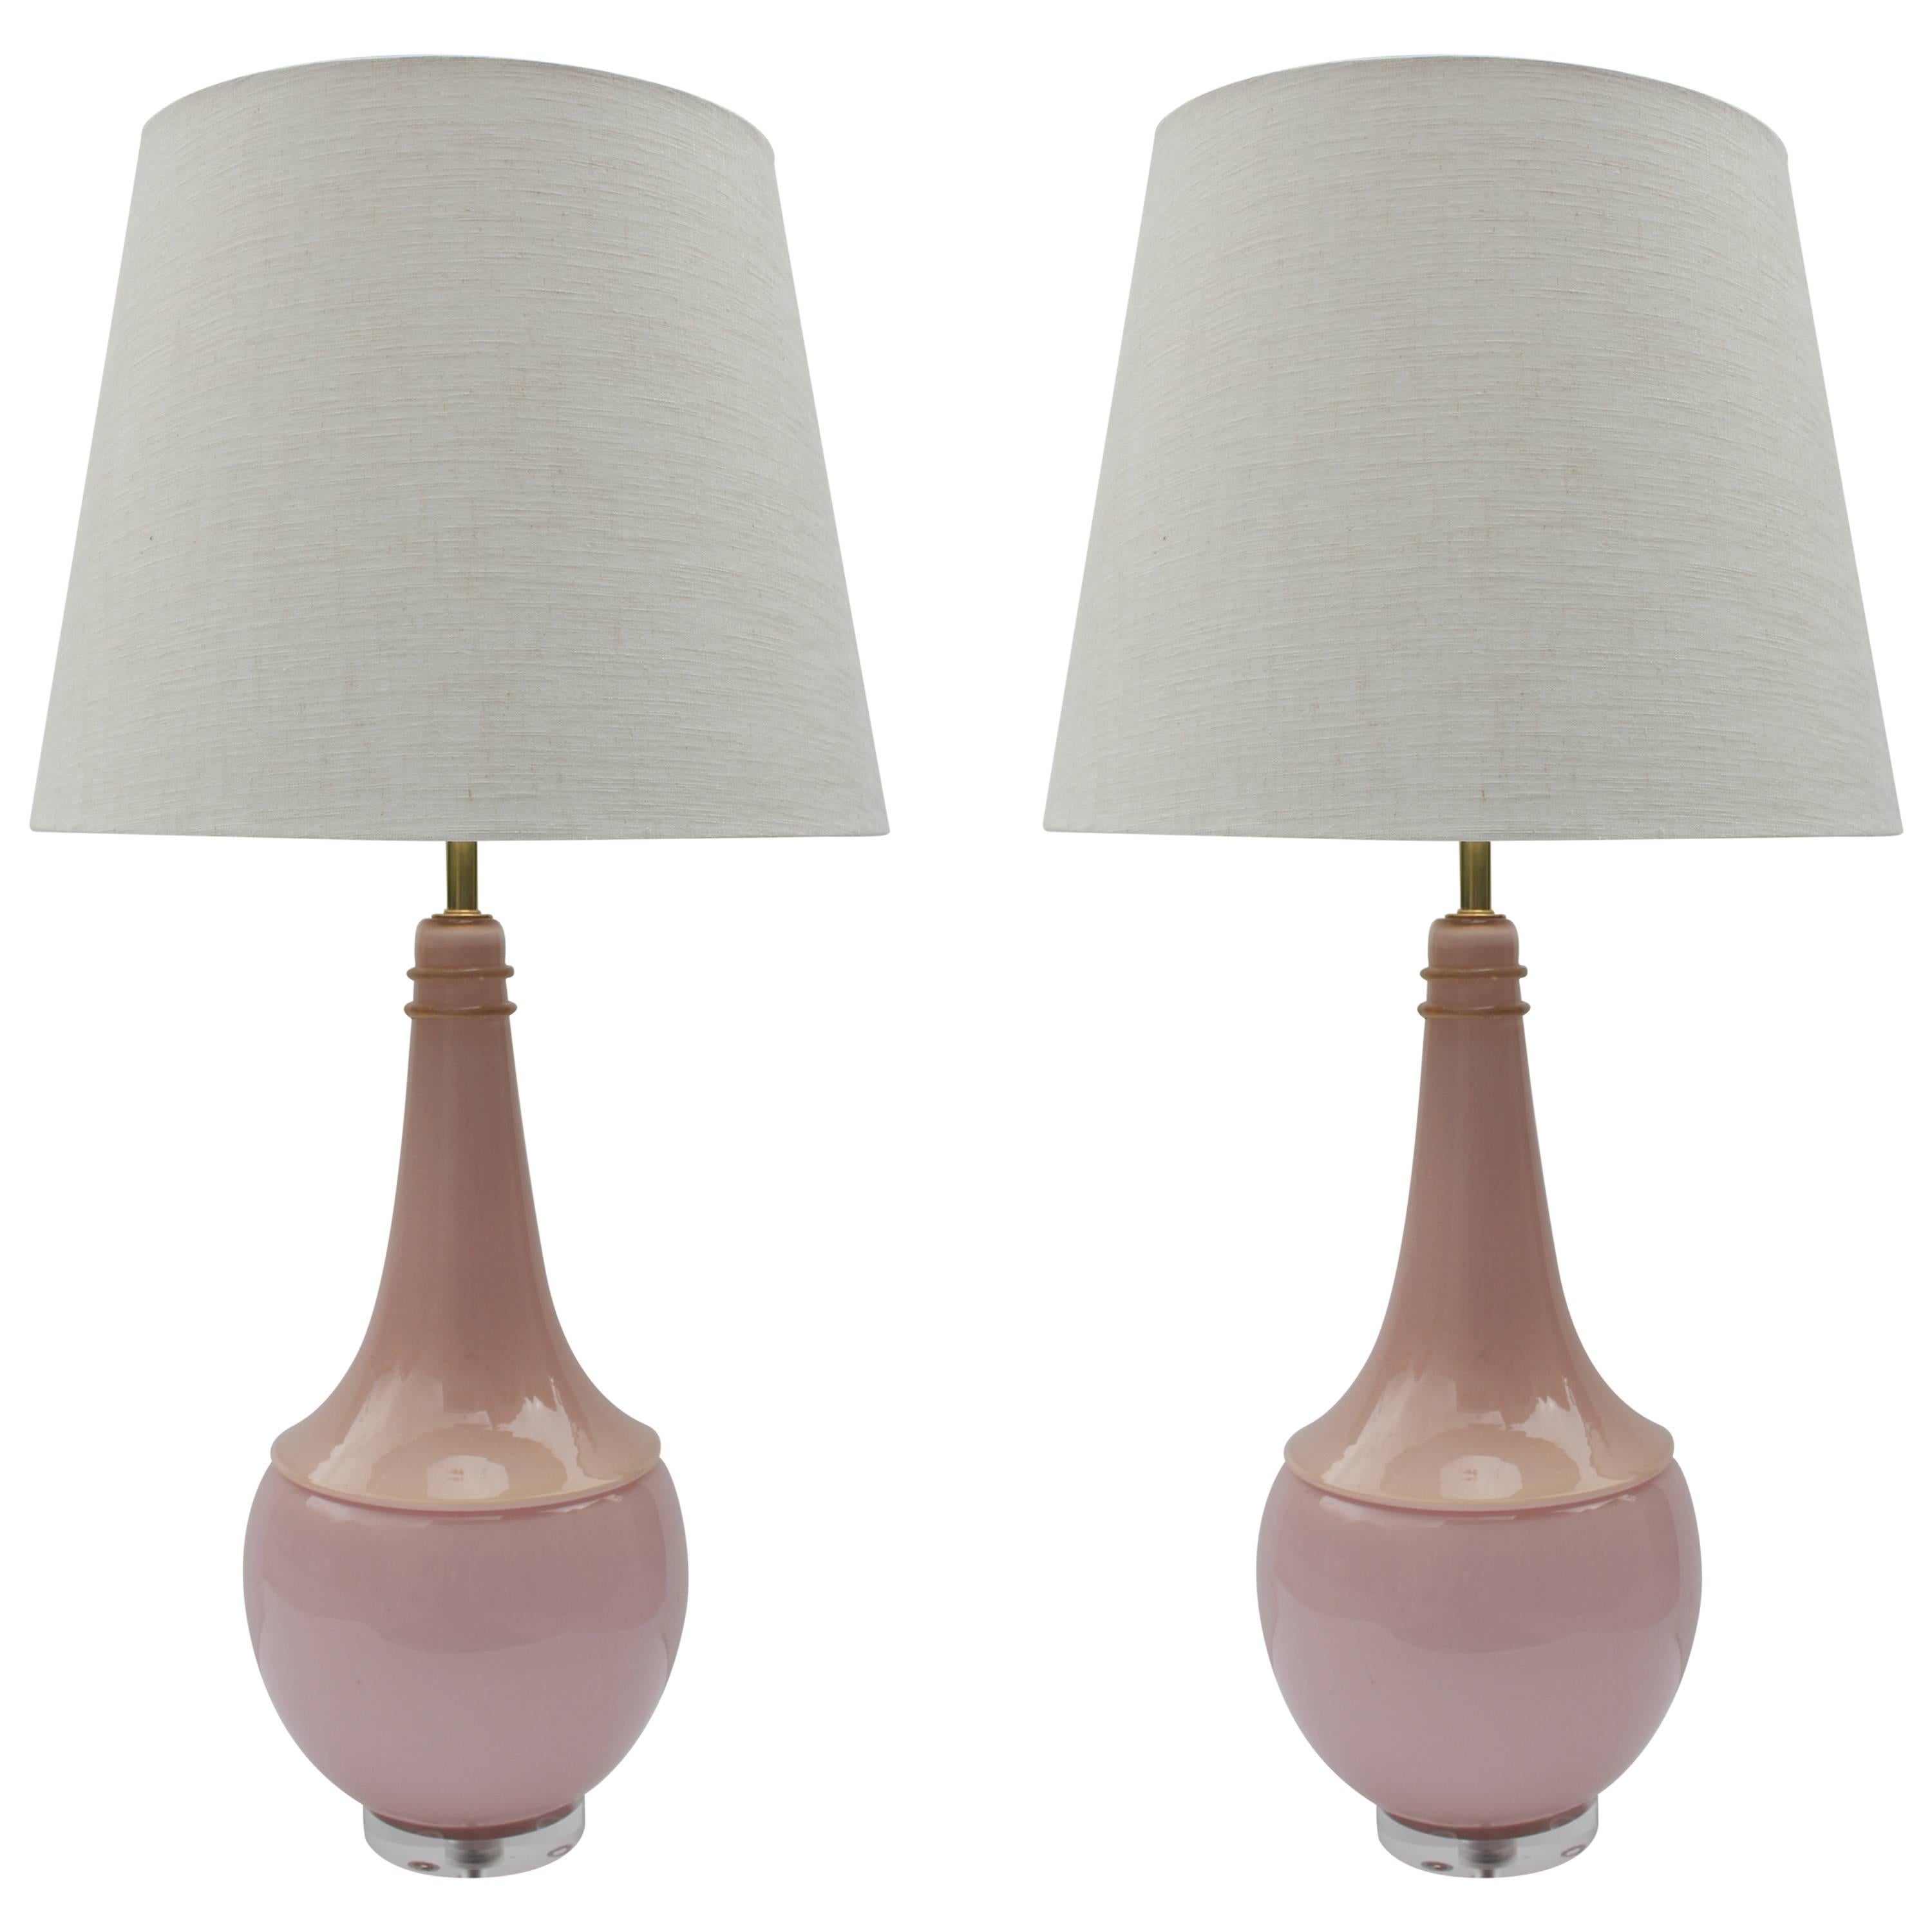 Exceptional Pair of Seguso Table Lamps with Gold Inclusion from Murano